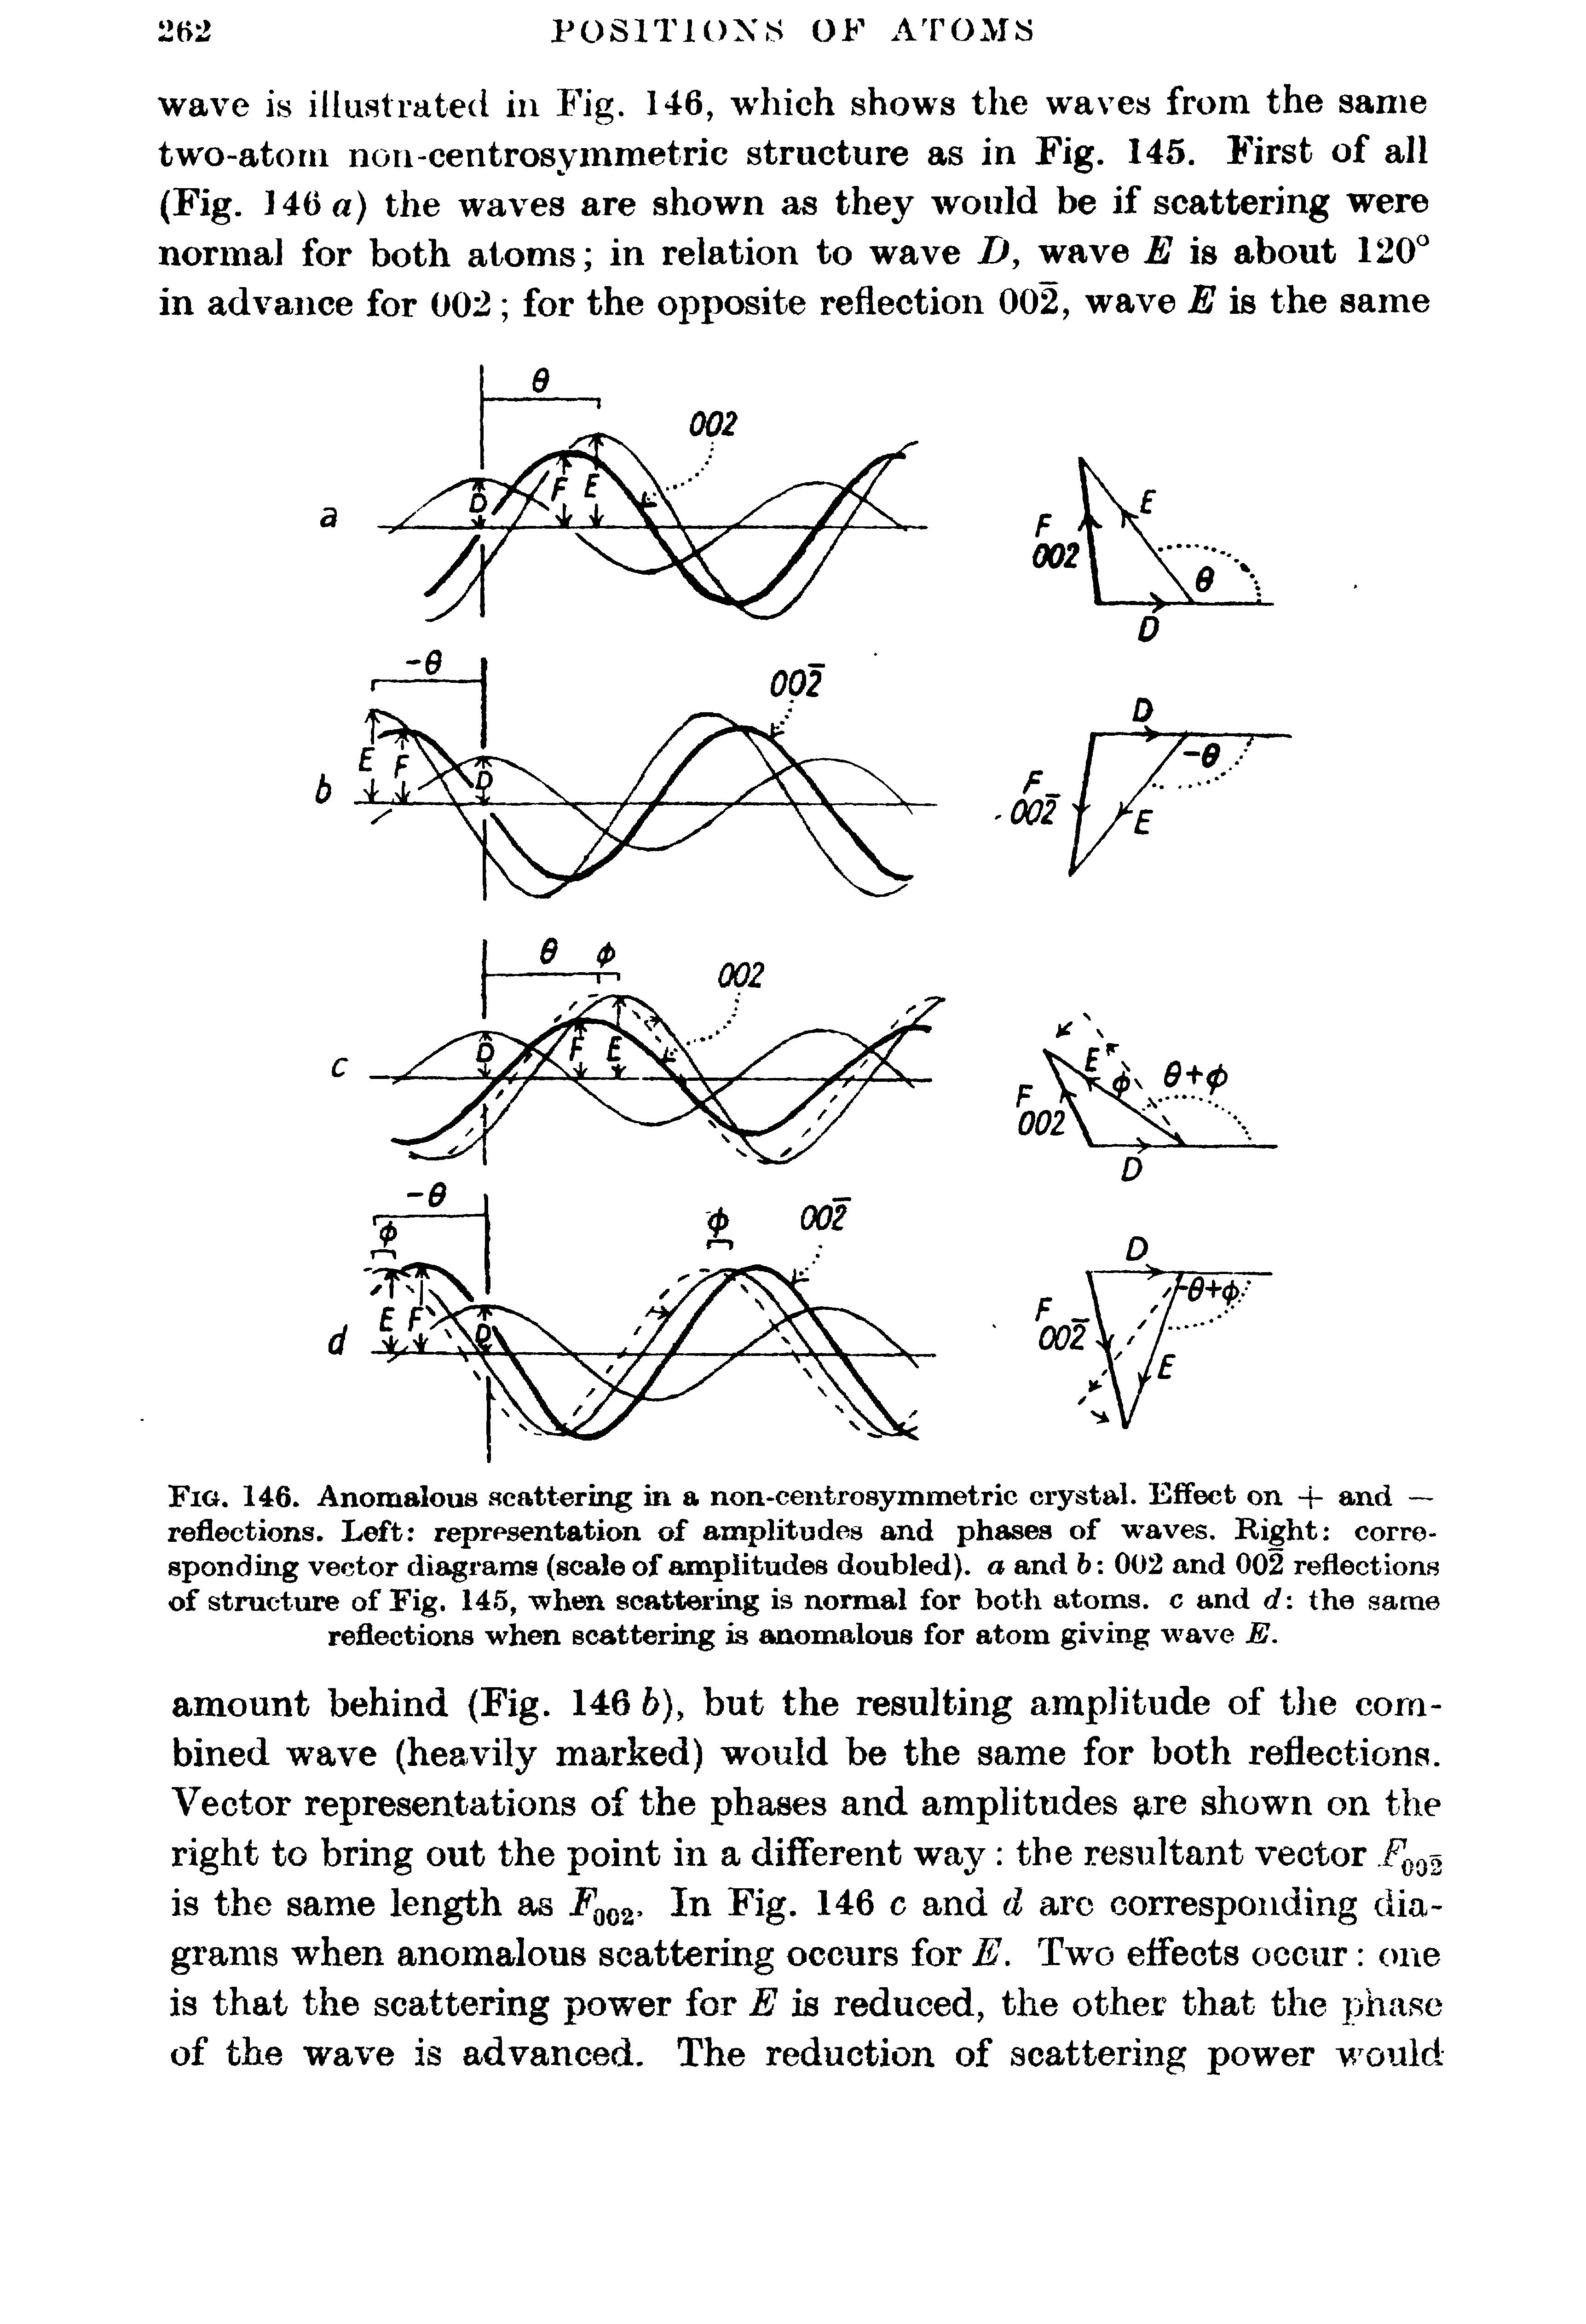 Fig. 146. Anomalous scattering in a non-centrosymmetrie crystal. Effect on -f and — reflections. Left representation of amplitudes and phases of waves. Right corresponding vector diagrams (scale of amplitudes doubled), a and b 002 and 002 reflections of structure of Fig. 145, when scattering is normal for both atoms, c and d the same reflections when scattering is anomalous for atom giving wave E.